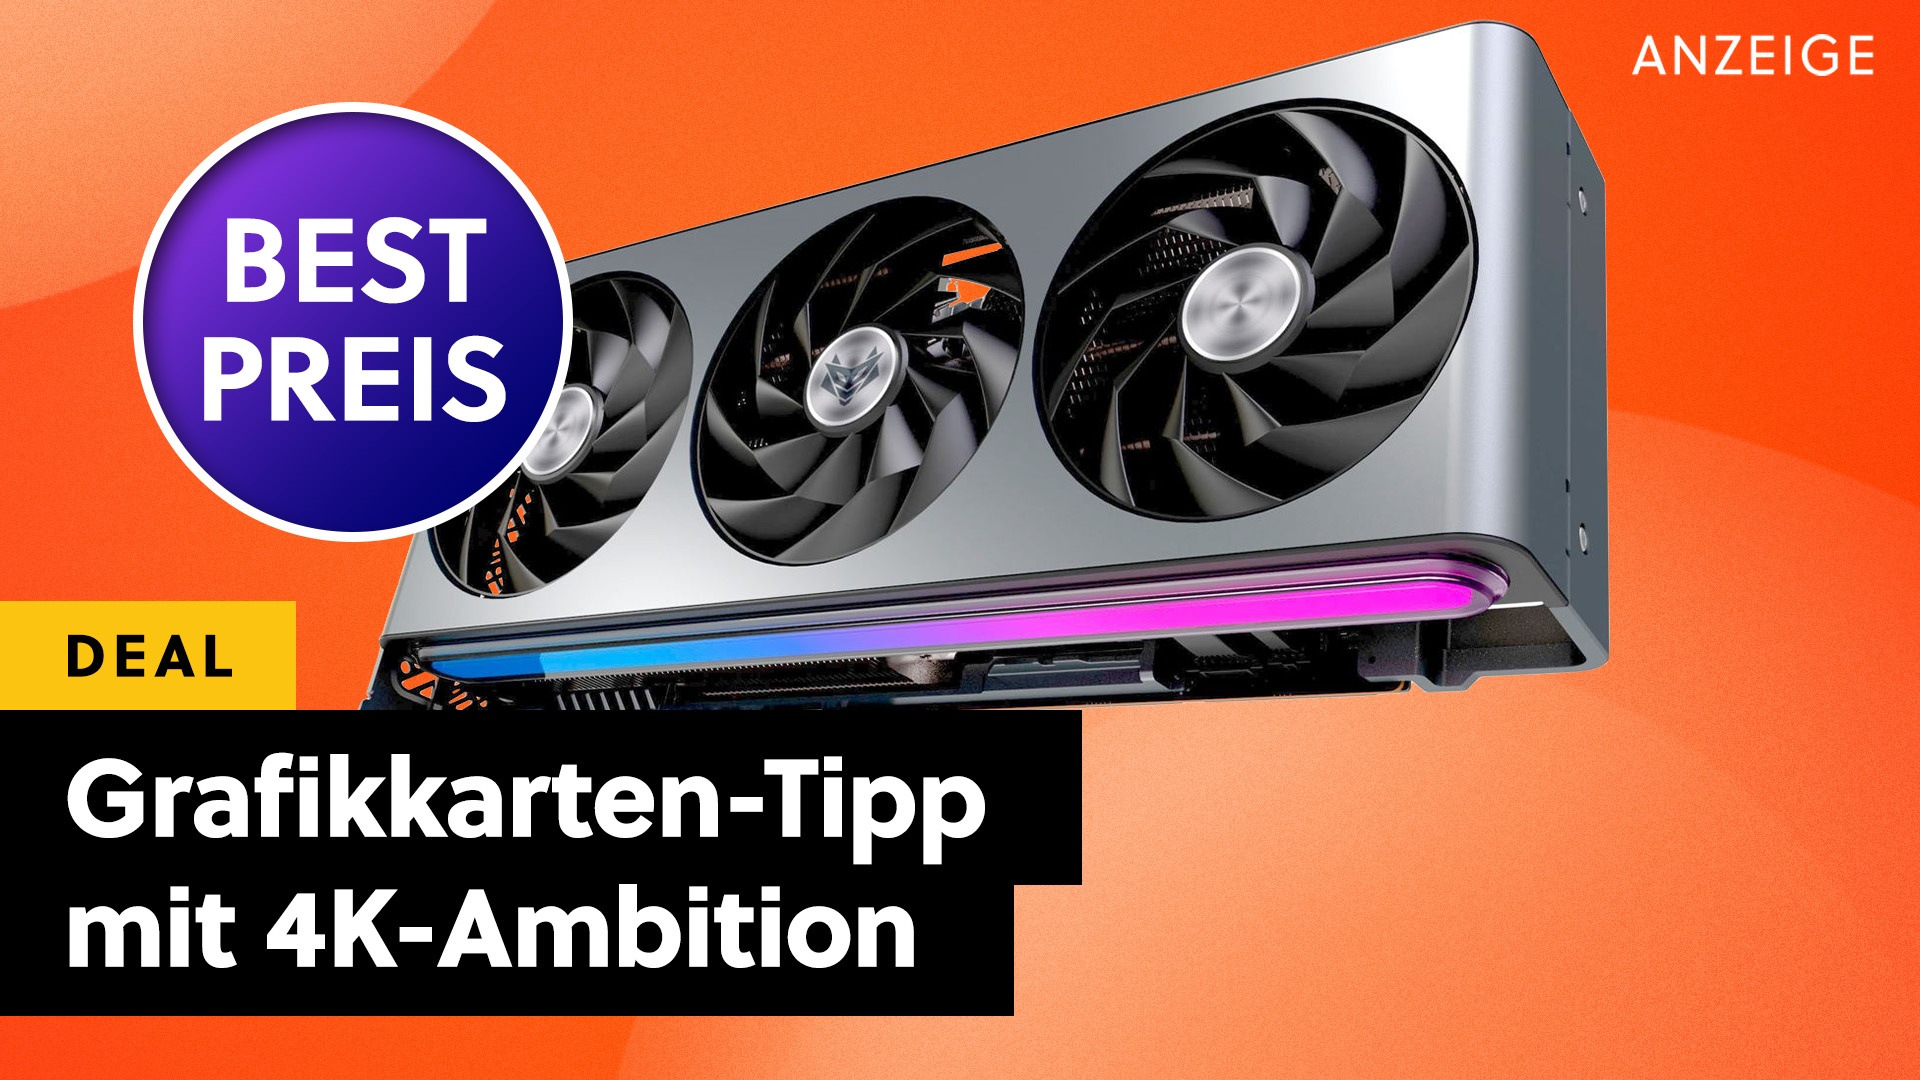 It's one of the best graphics cards for 4K and WQHD gaming, and Mindfactory has the RX 7900 XT at the best prices!